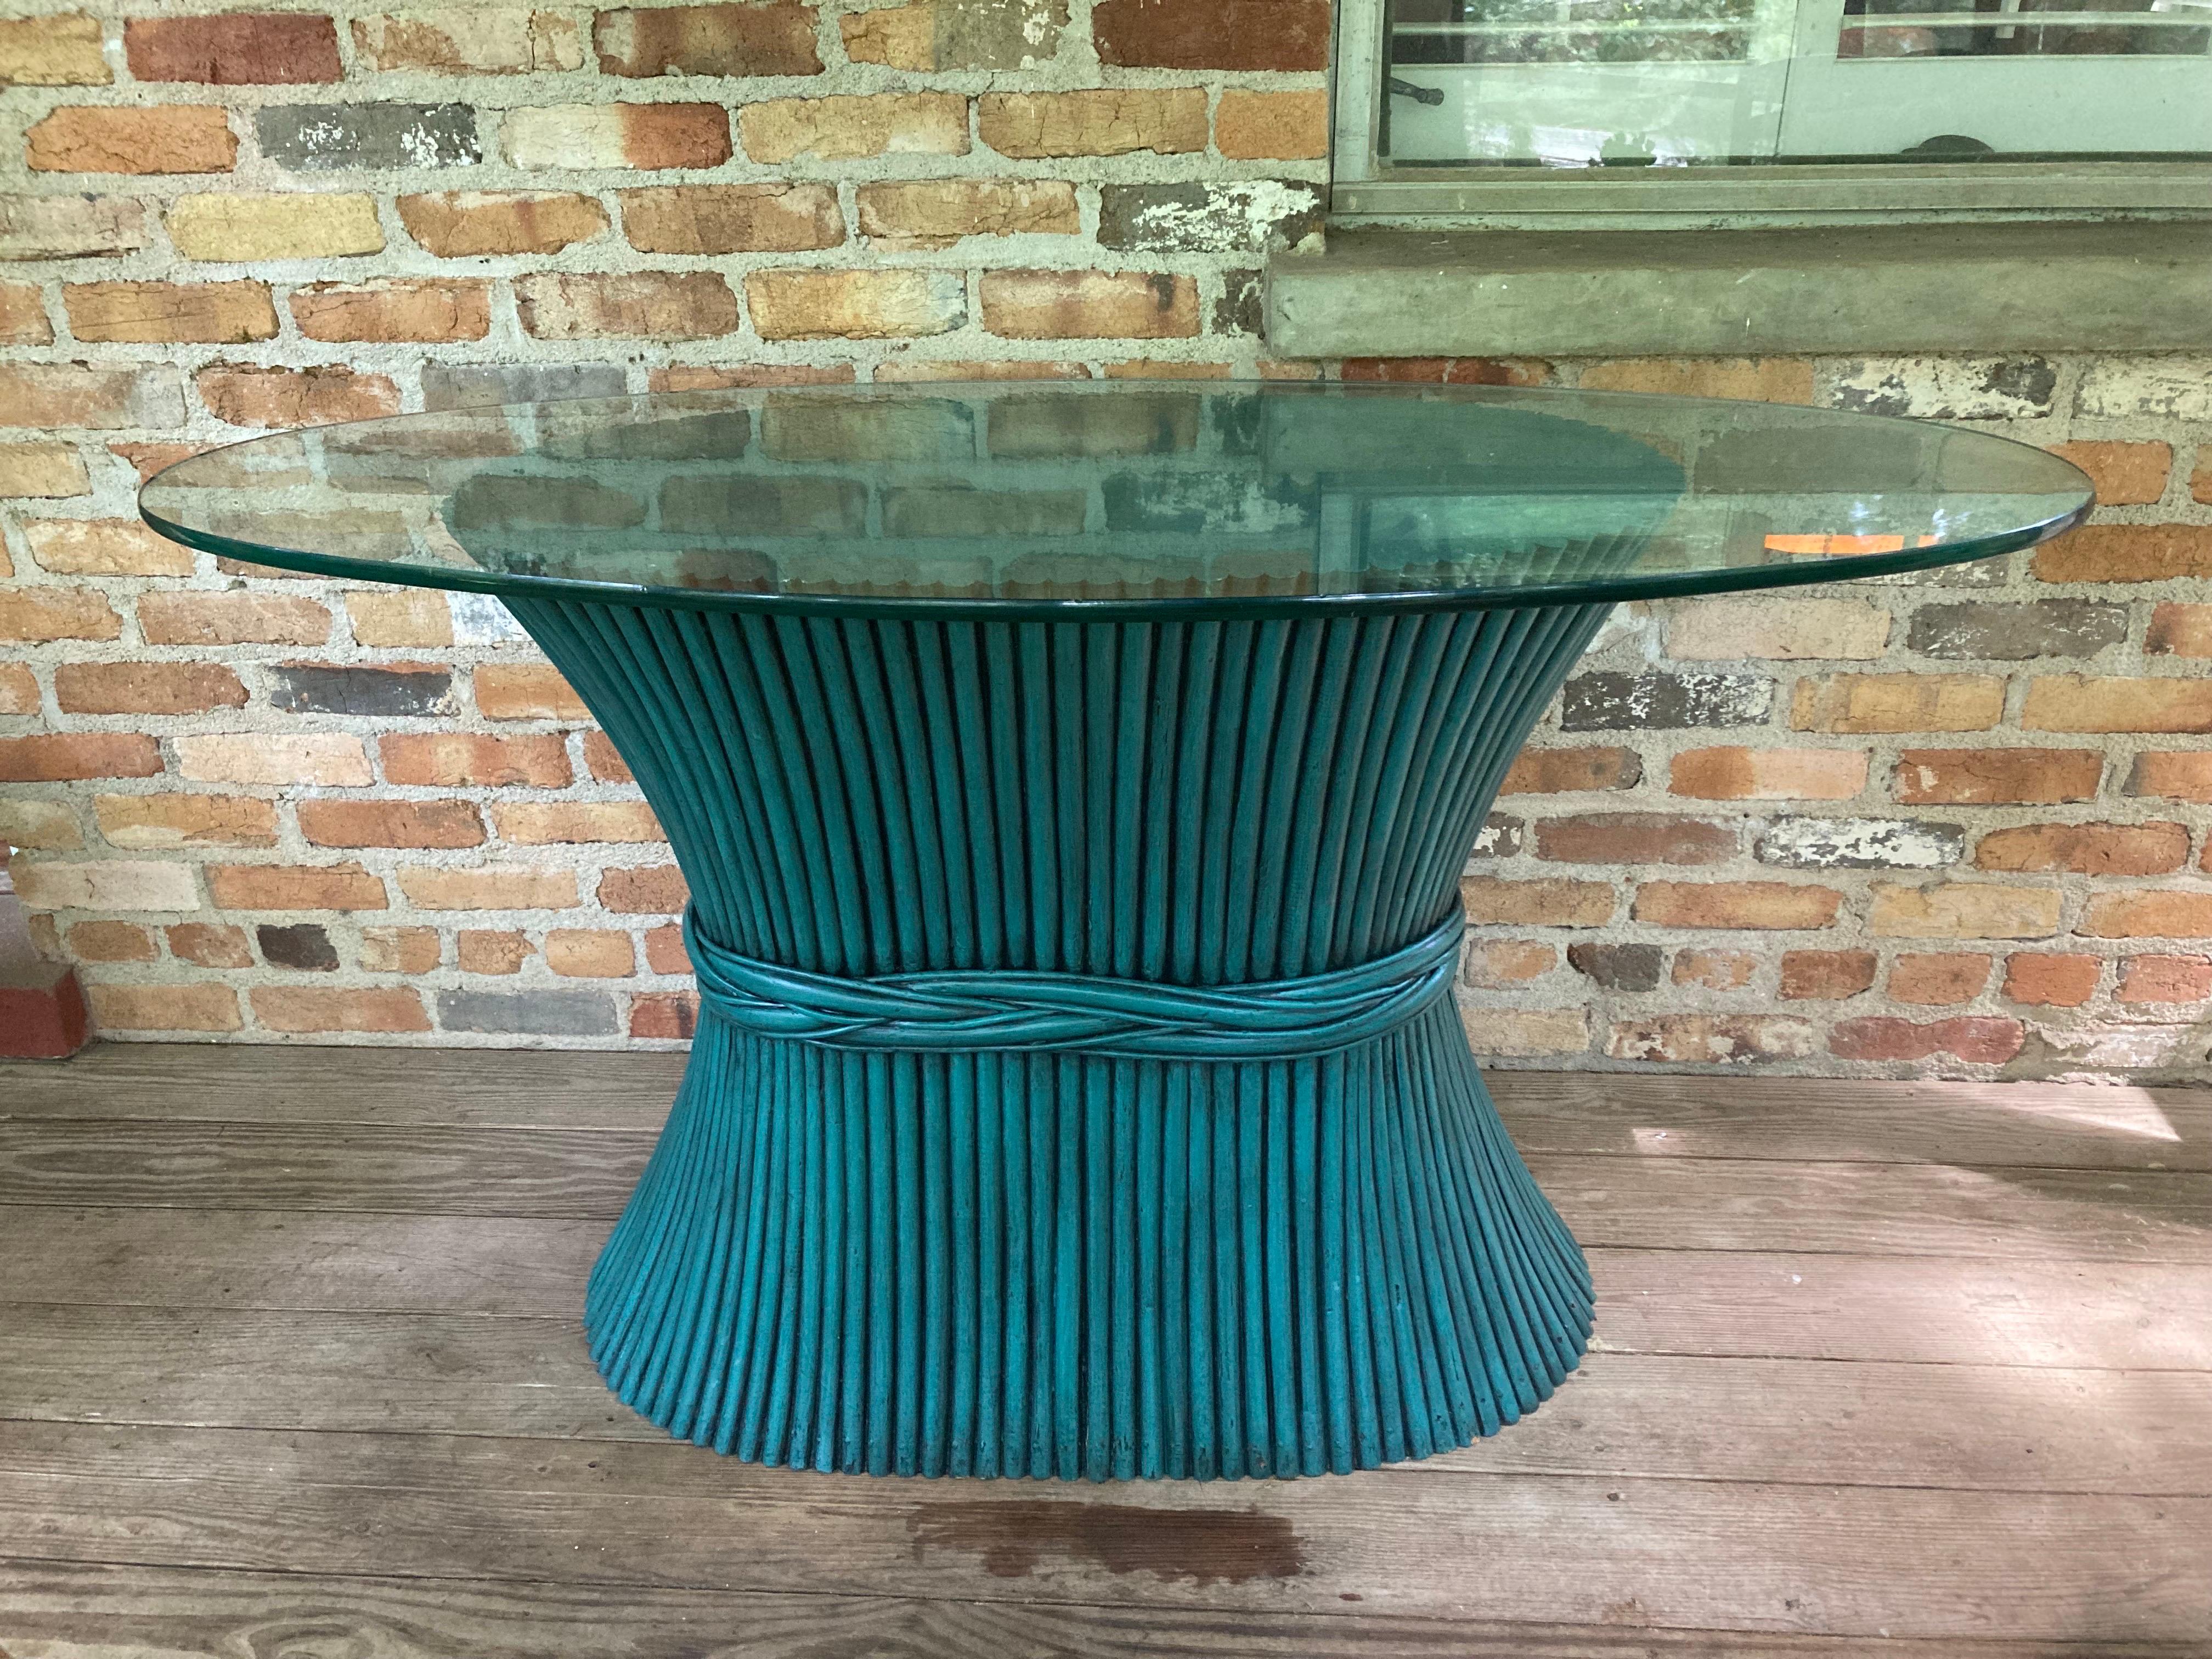 1950s McGuire Sheaf of Wheat Aegean Blue Table
wonderful color, mid century mcguire base with custom cut thick glass oval top
no maker’s mark
56ʺW × 24ʺD × 29.5ʺH
Beautiful Rich Hue, perfect for any room, or style, mcm, coastal or urban chic...
she